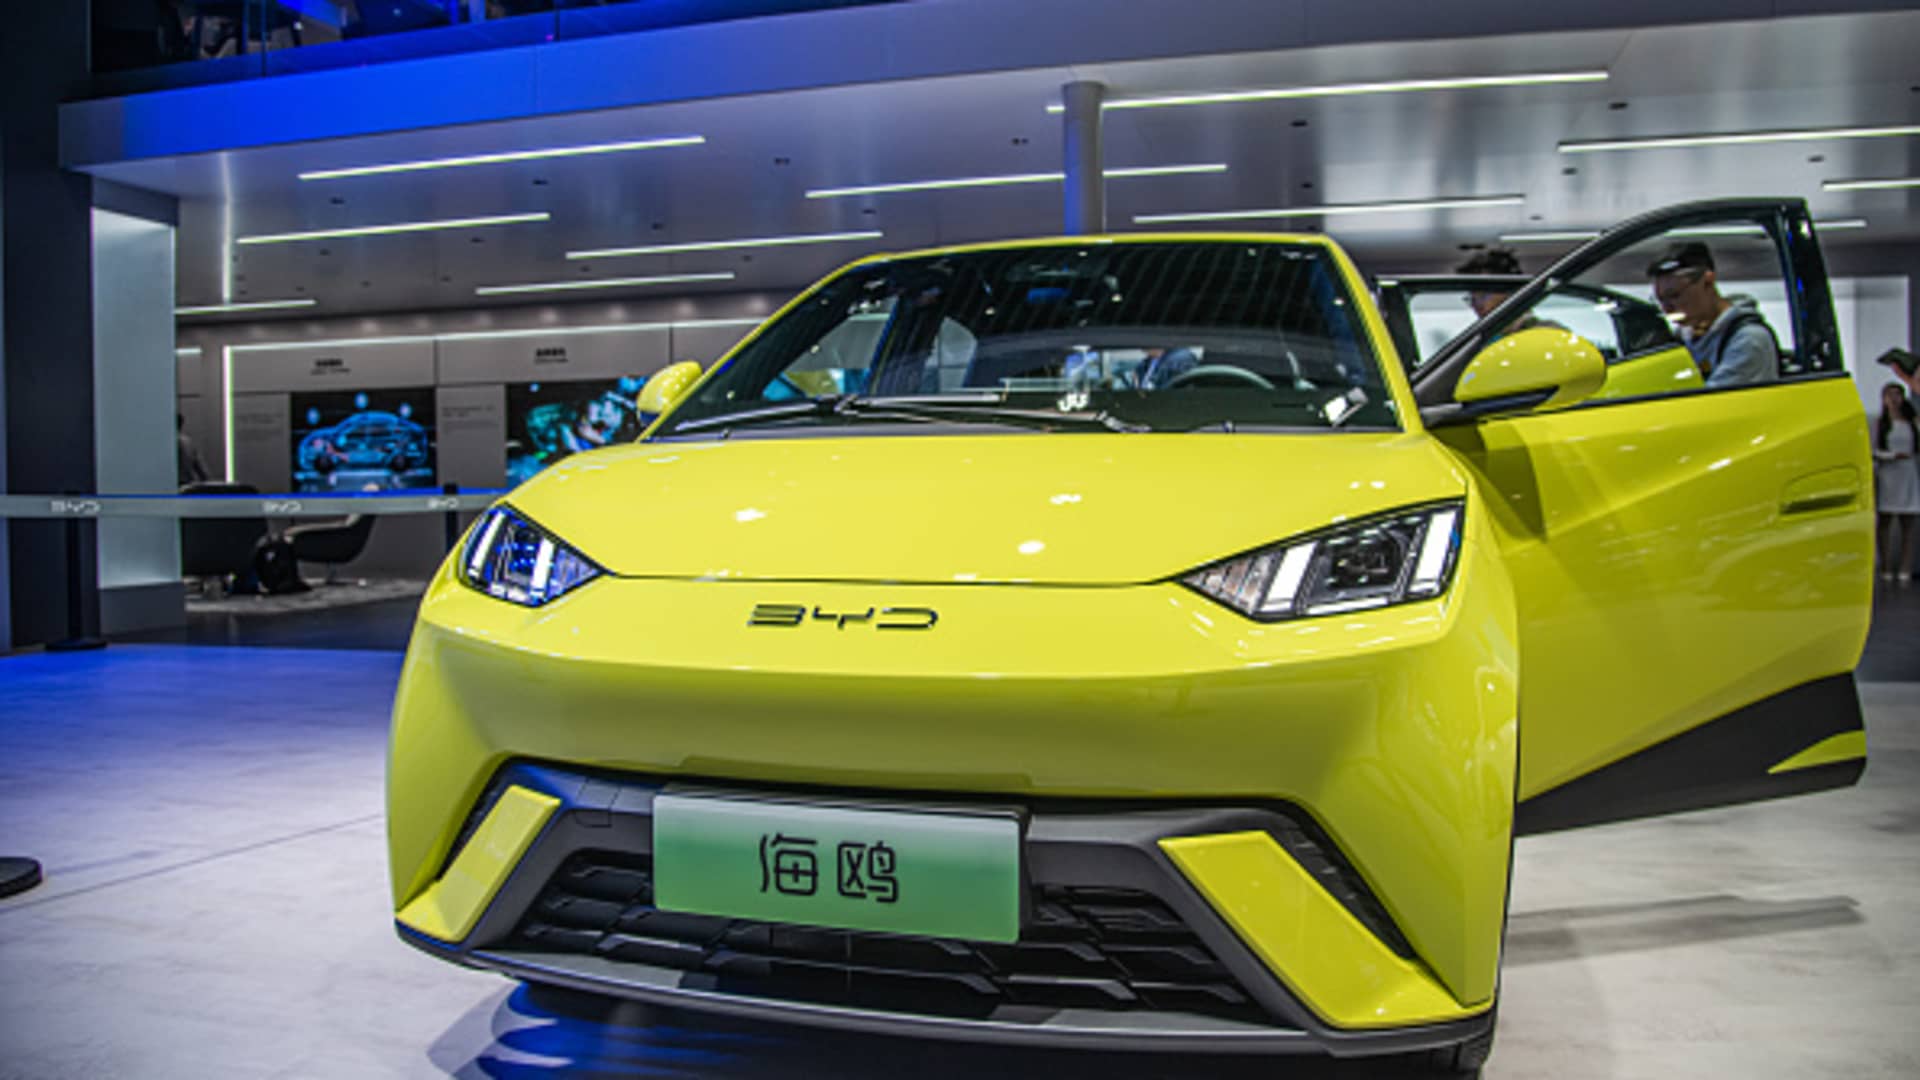 Why China poses a growing threat to the U.S. auto industry